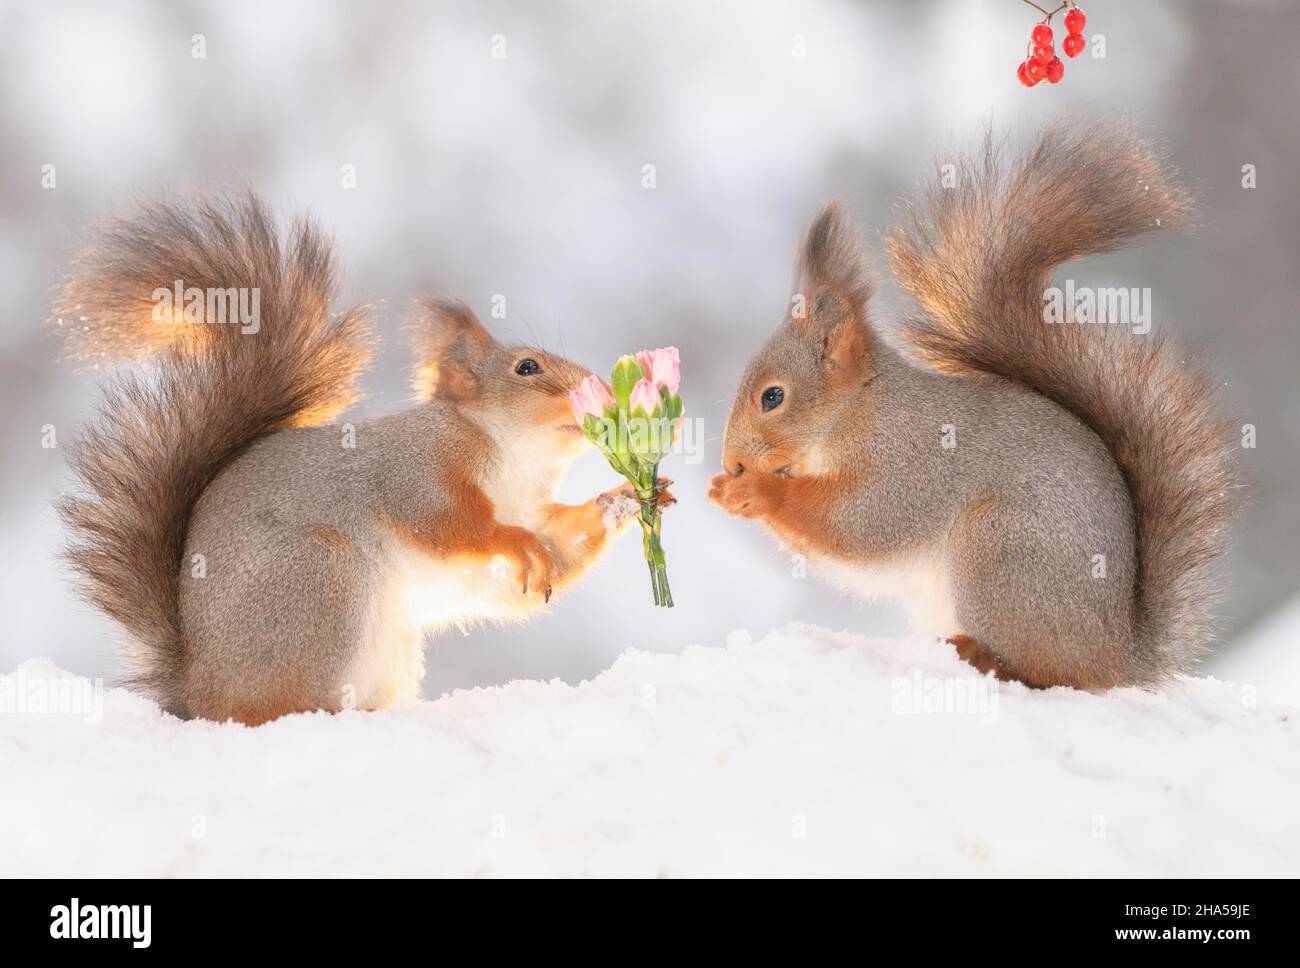 red squirrel is holding an bouquet dianthus for another squirrel Stock Photo